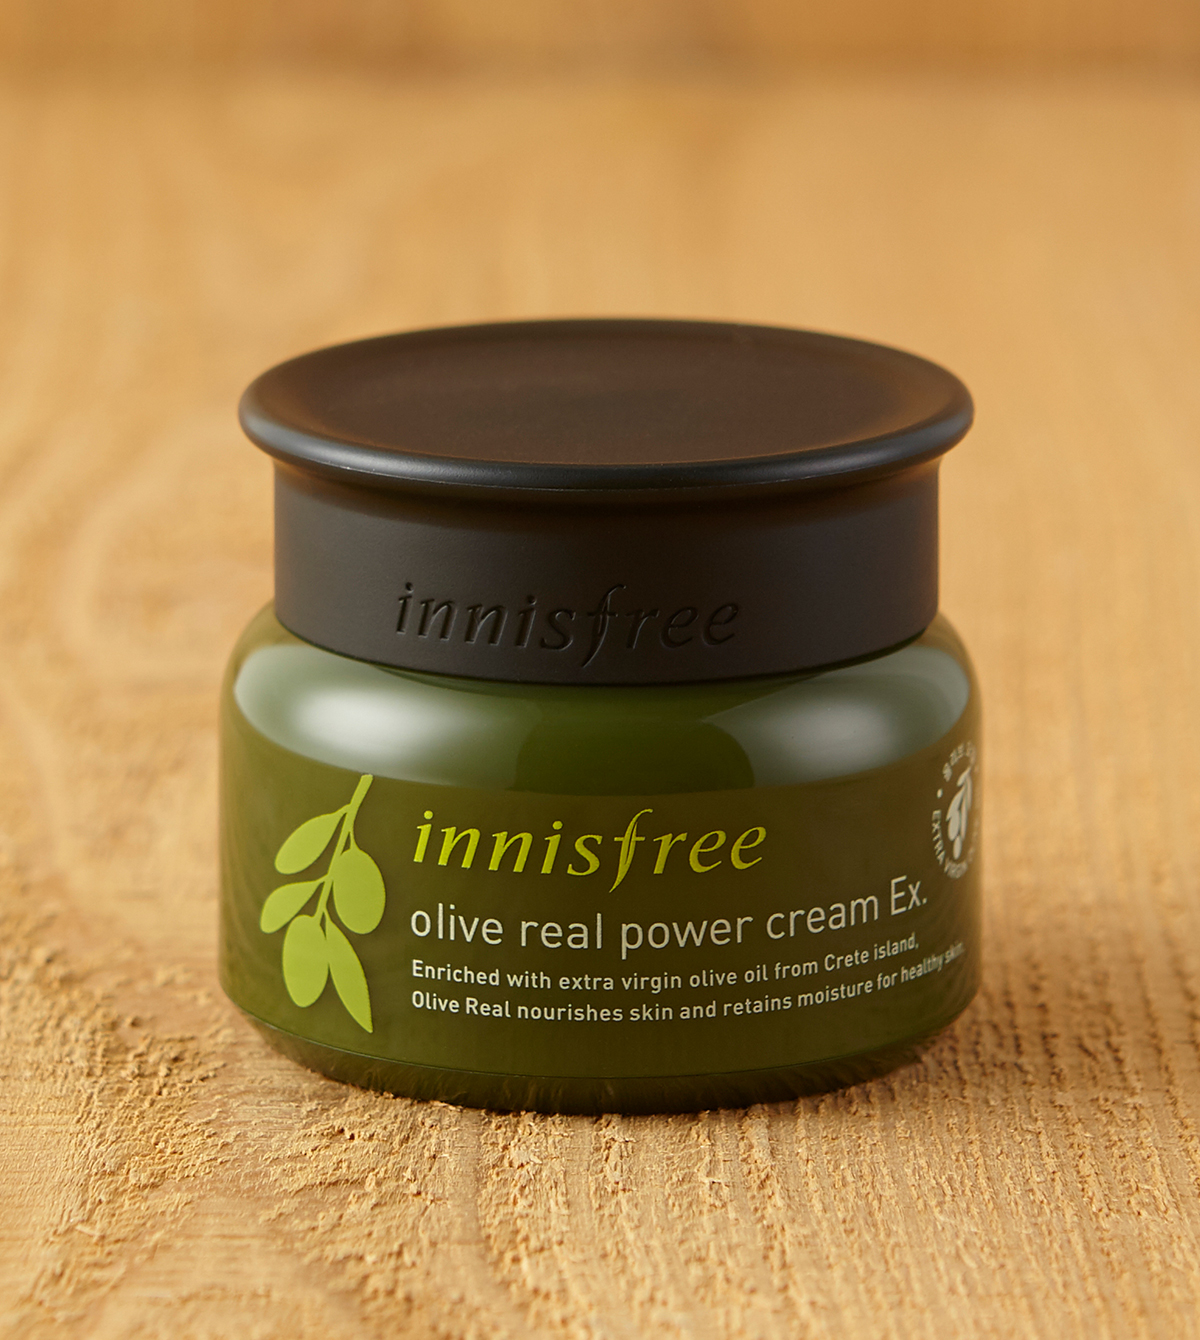 Innisfree Olive Real Power Cream - Innisfree Skin Care - Top 10 Moisturizers from Innisfree India to Try this Season